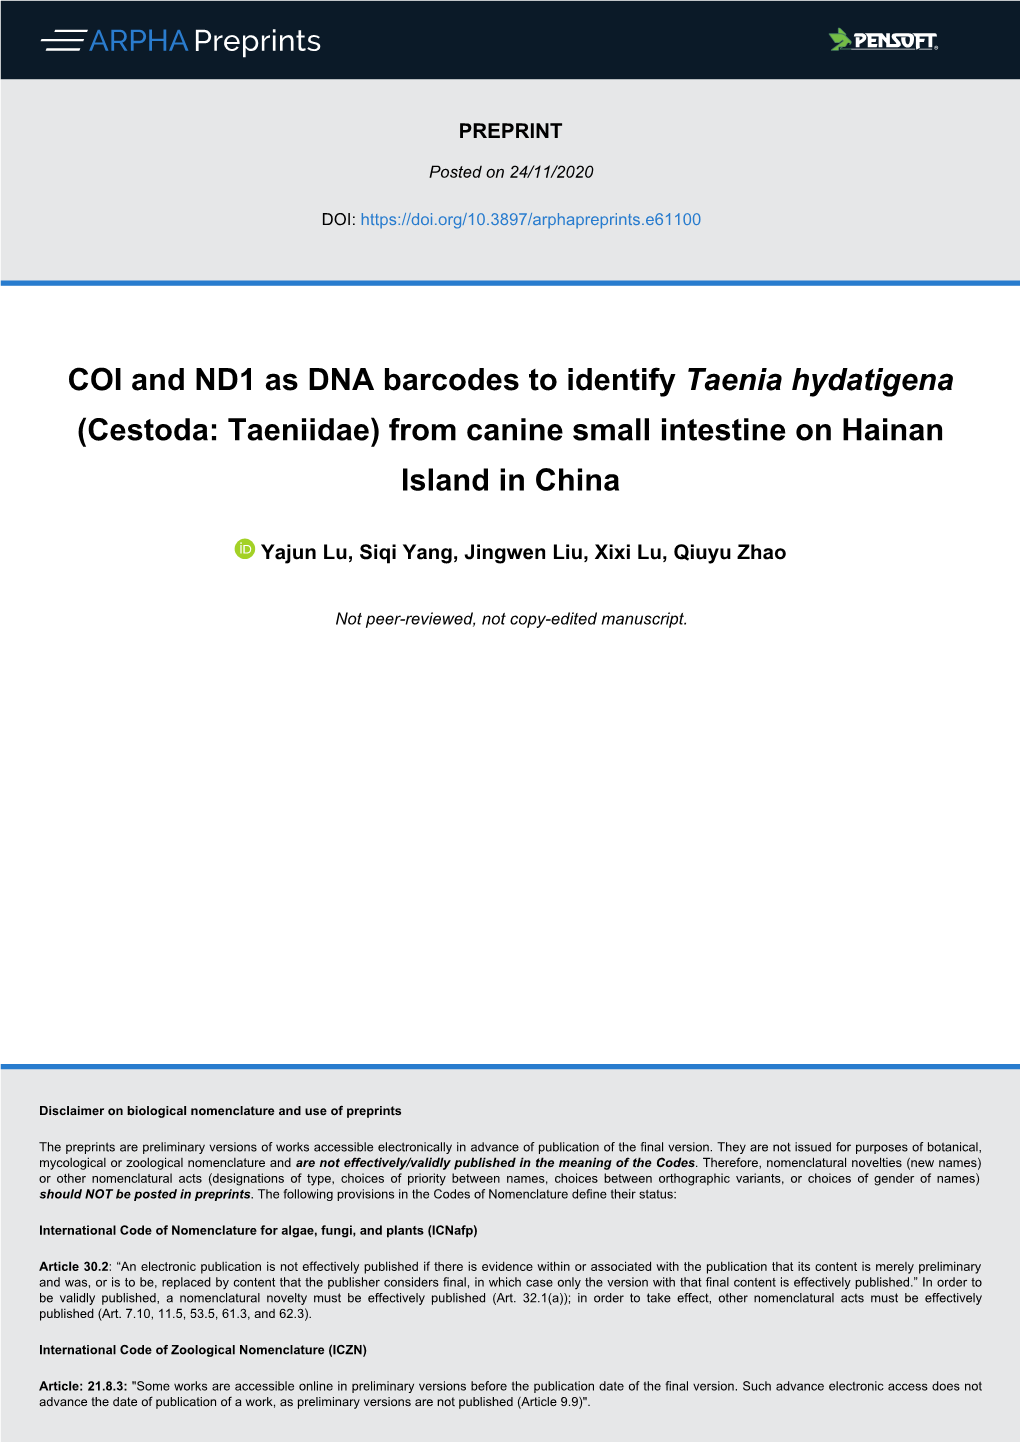 COI and ND1 As DNA Barcodes to Identify Taenia Hydatigena (Cestoda: Taeniidae) from Canine Small Intestine on Hainan Island in China